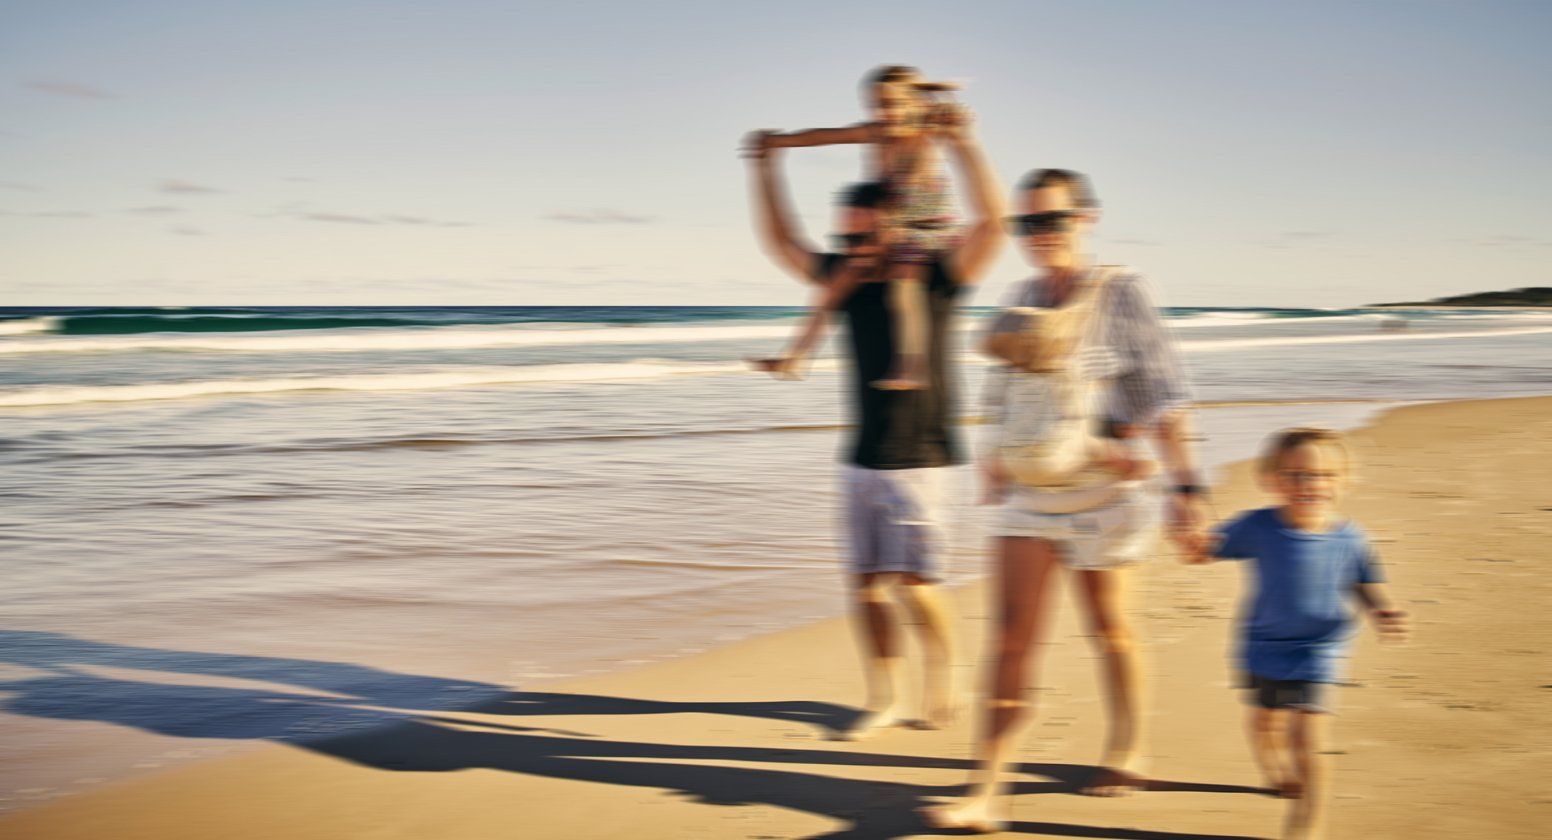 Nystagmus: Image of a happy family walking on the beach where vision is blurred as if the scene is moving quickly.